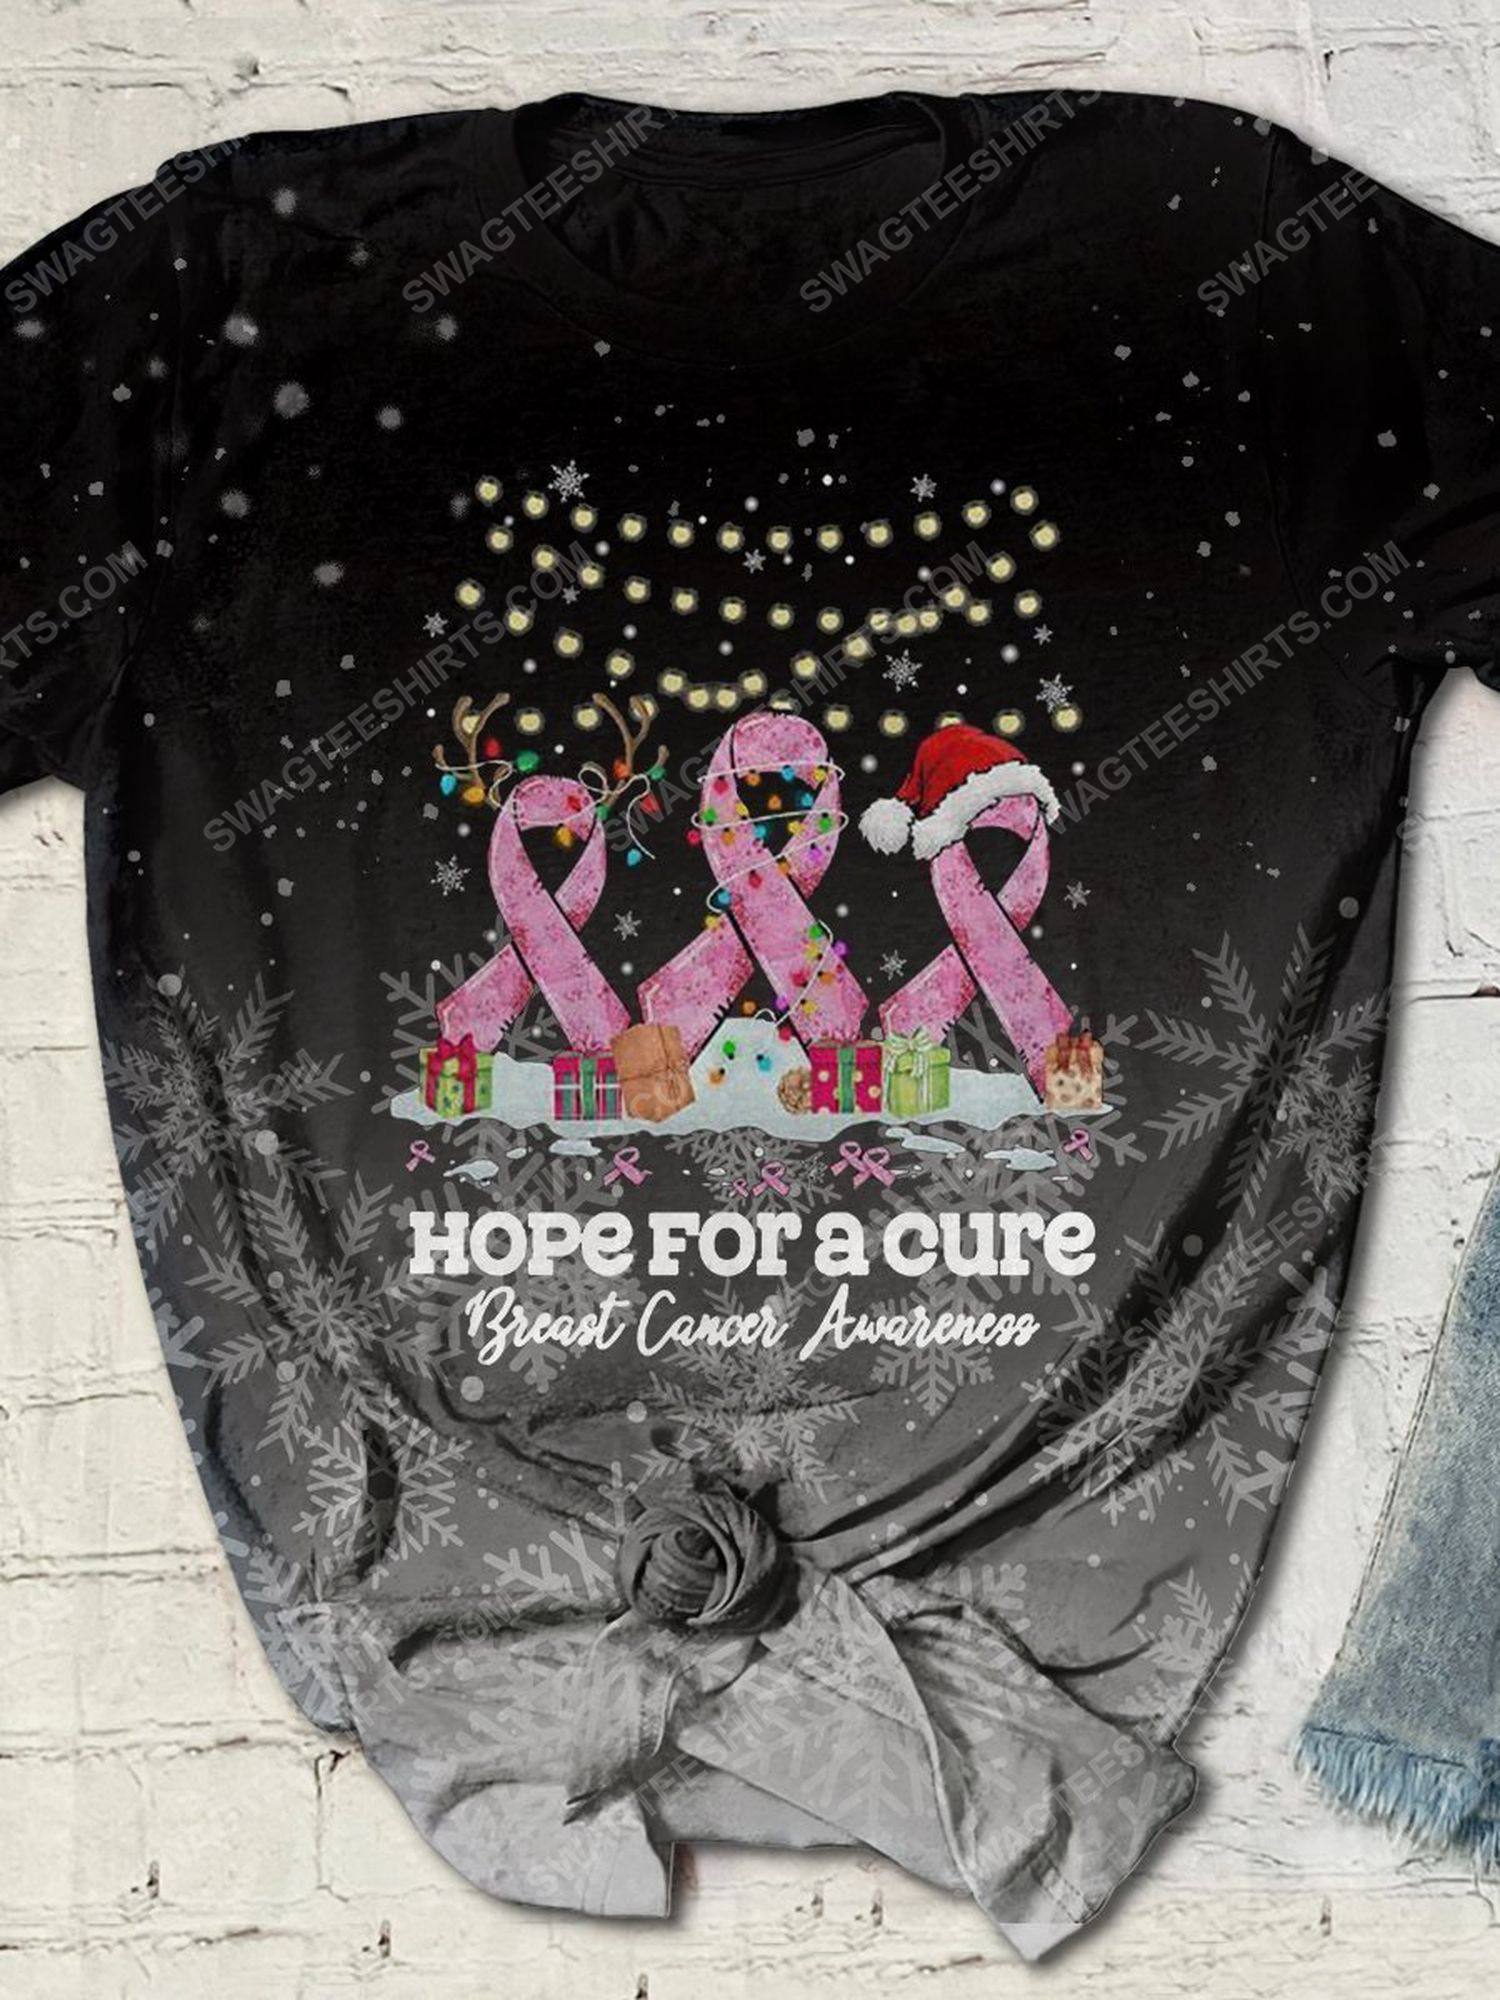 Breast cancer awareness hope for a cure full print shirt 1 - Copy (2)